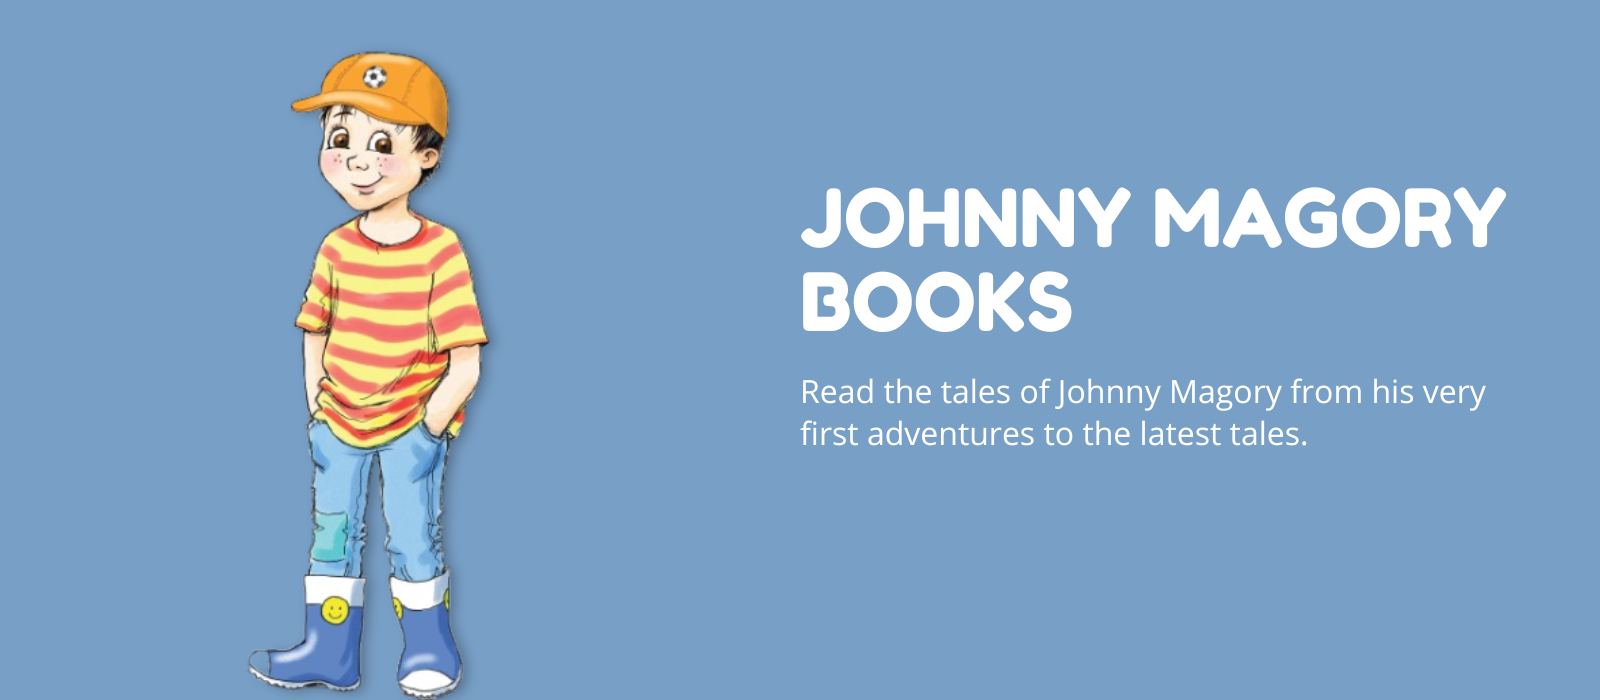 Johnny Magory - Johnny Magory Books